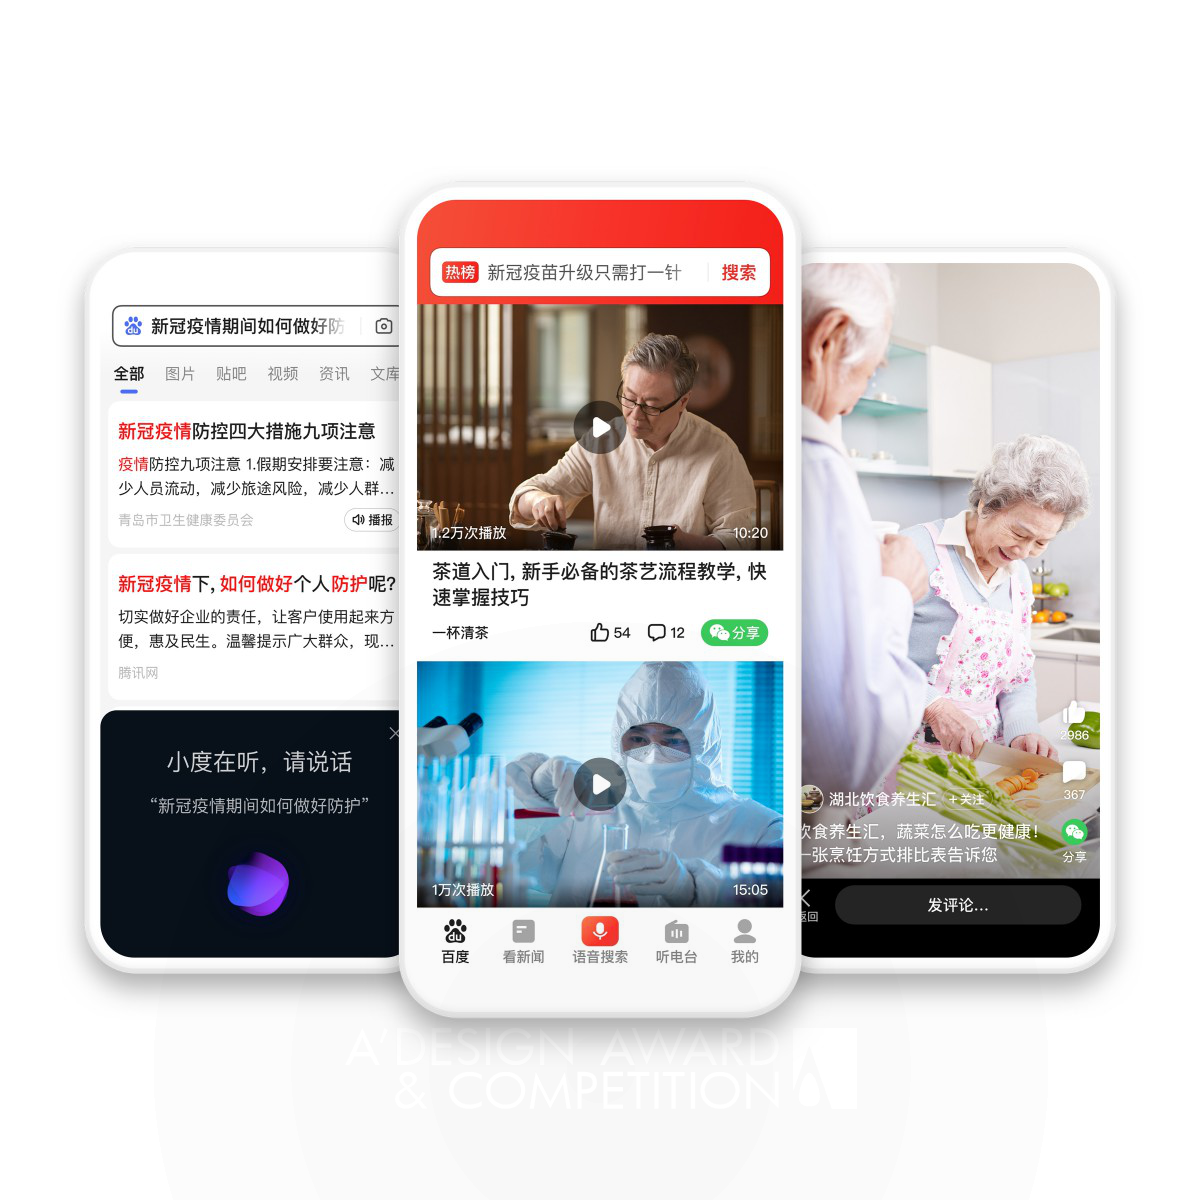 Baidu App for the Elderly Content and Service Mobile App by BAIDU MEUX